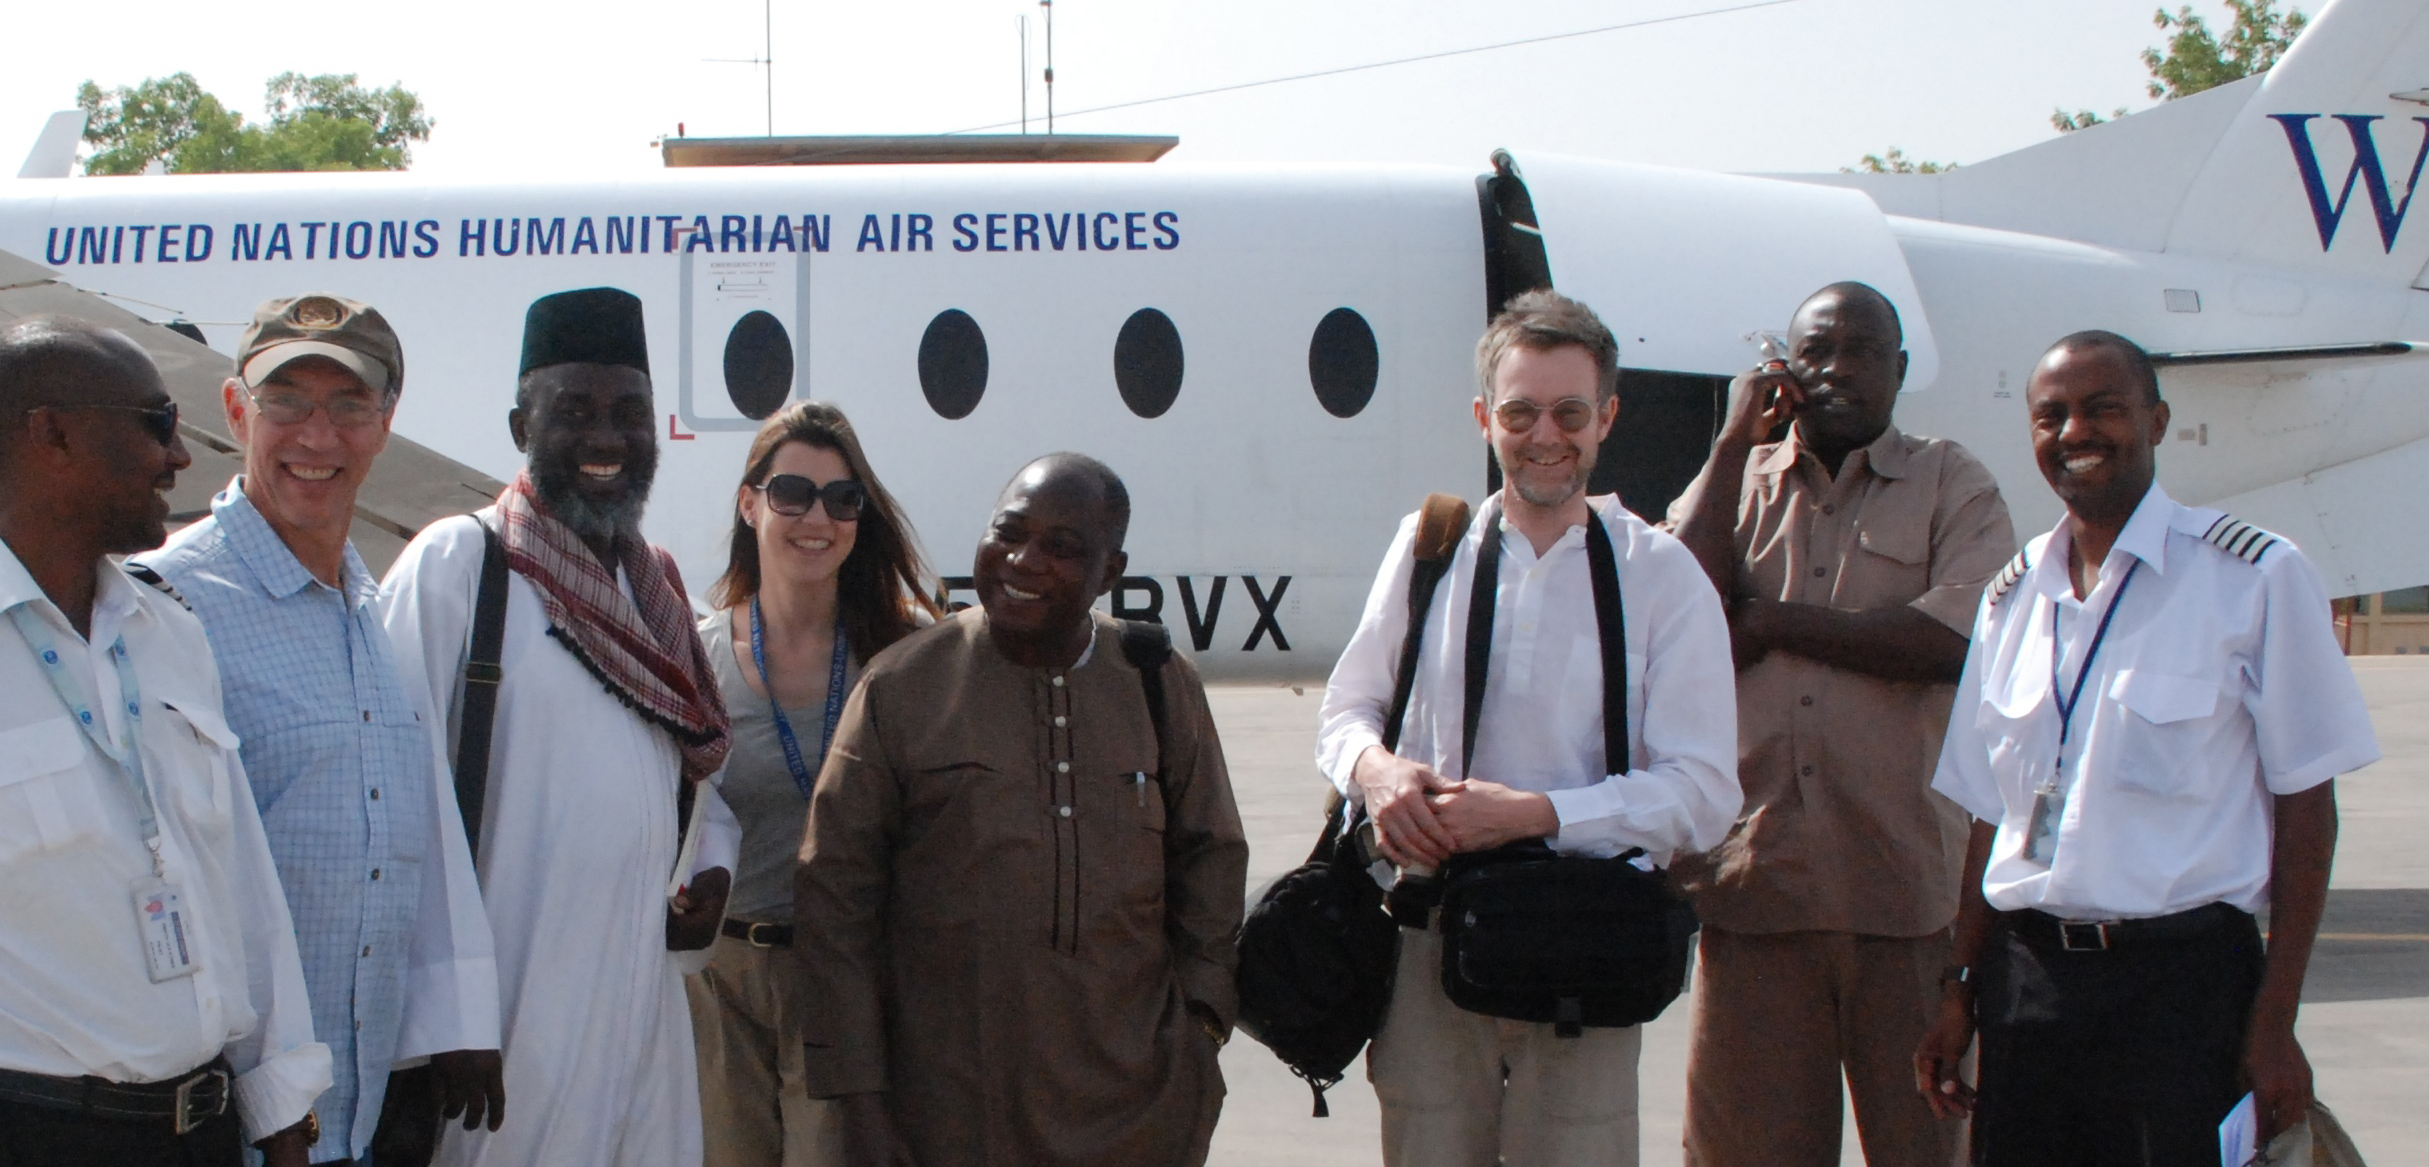 The UN project team in Moundou, southern Chad